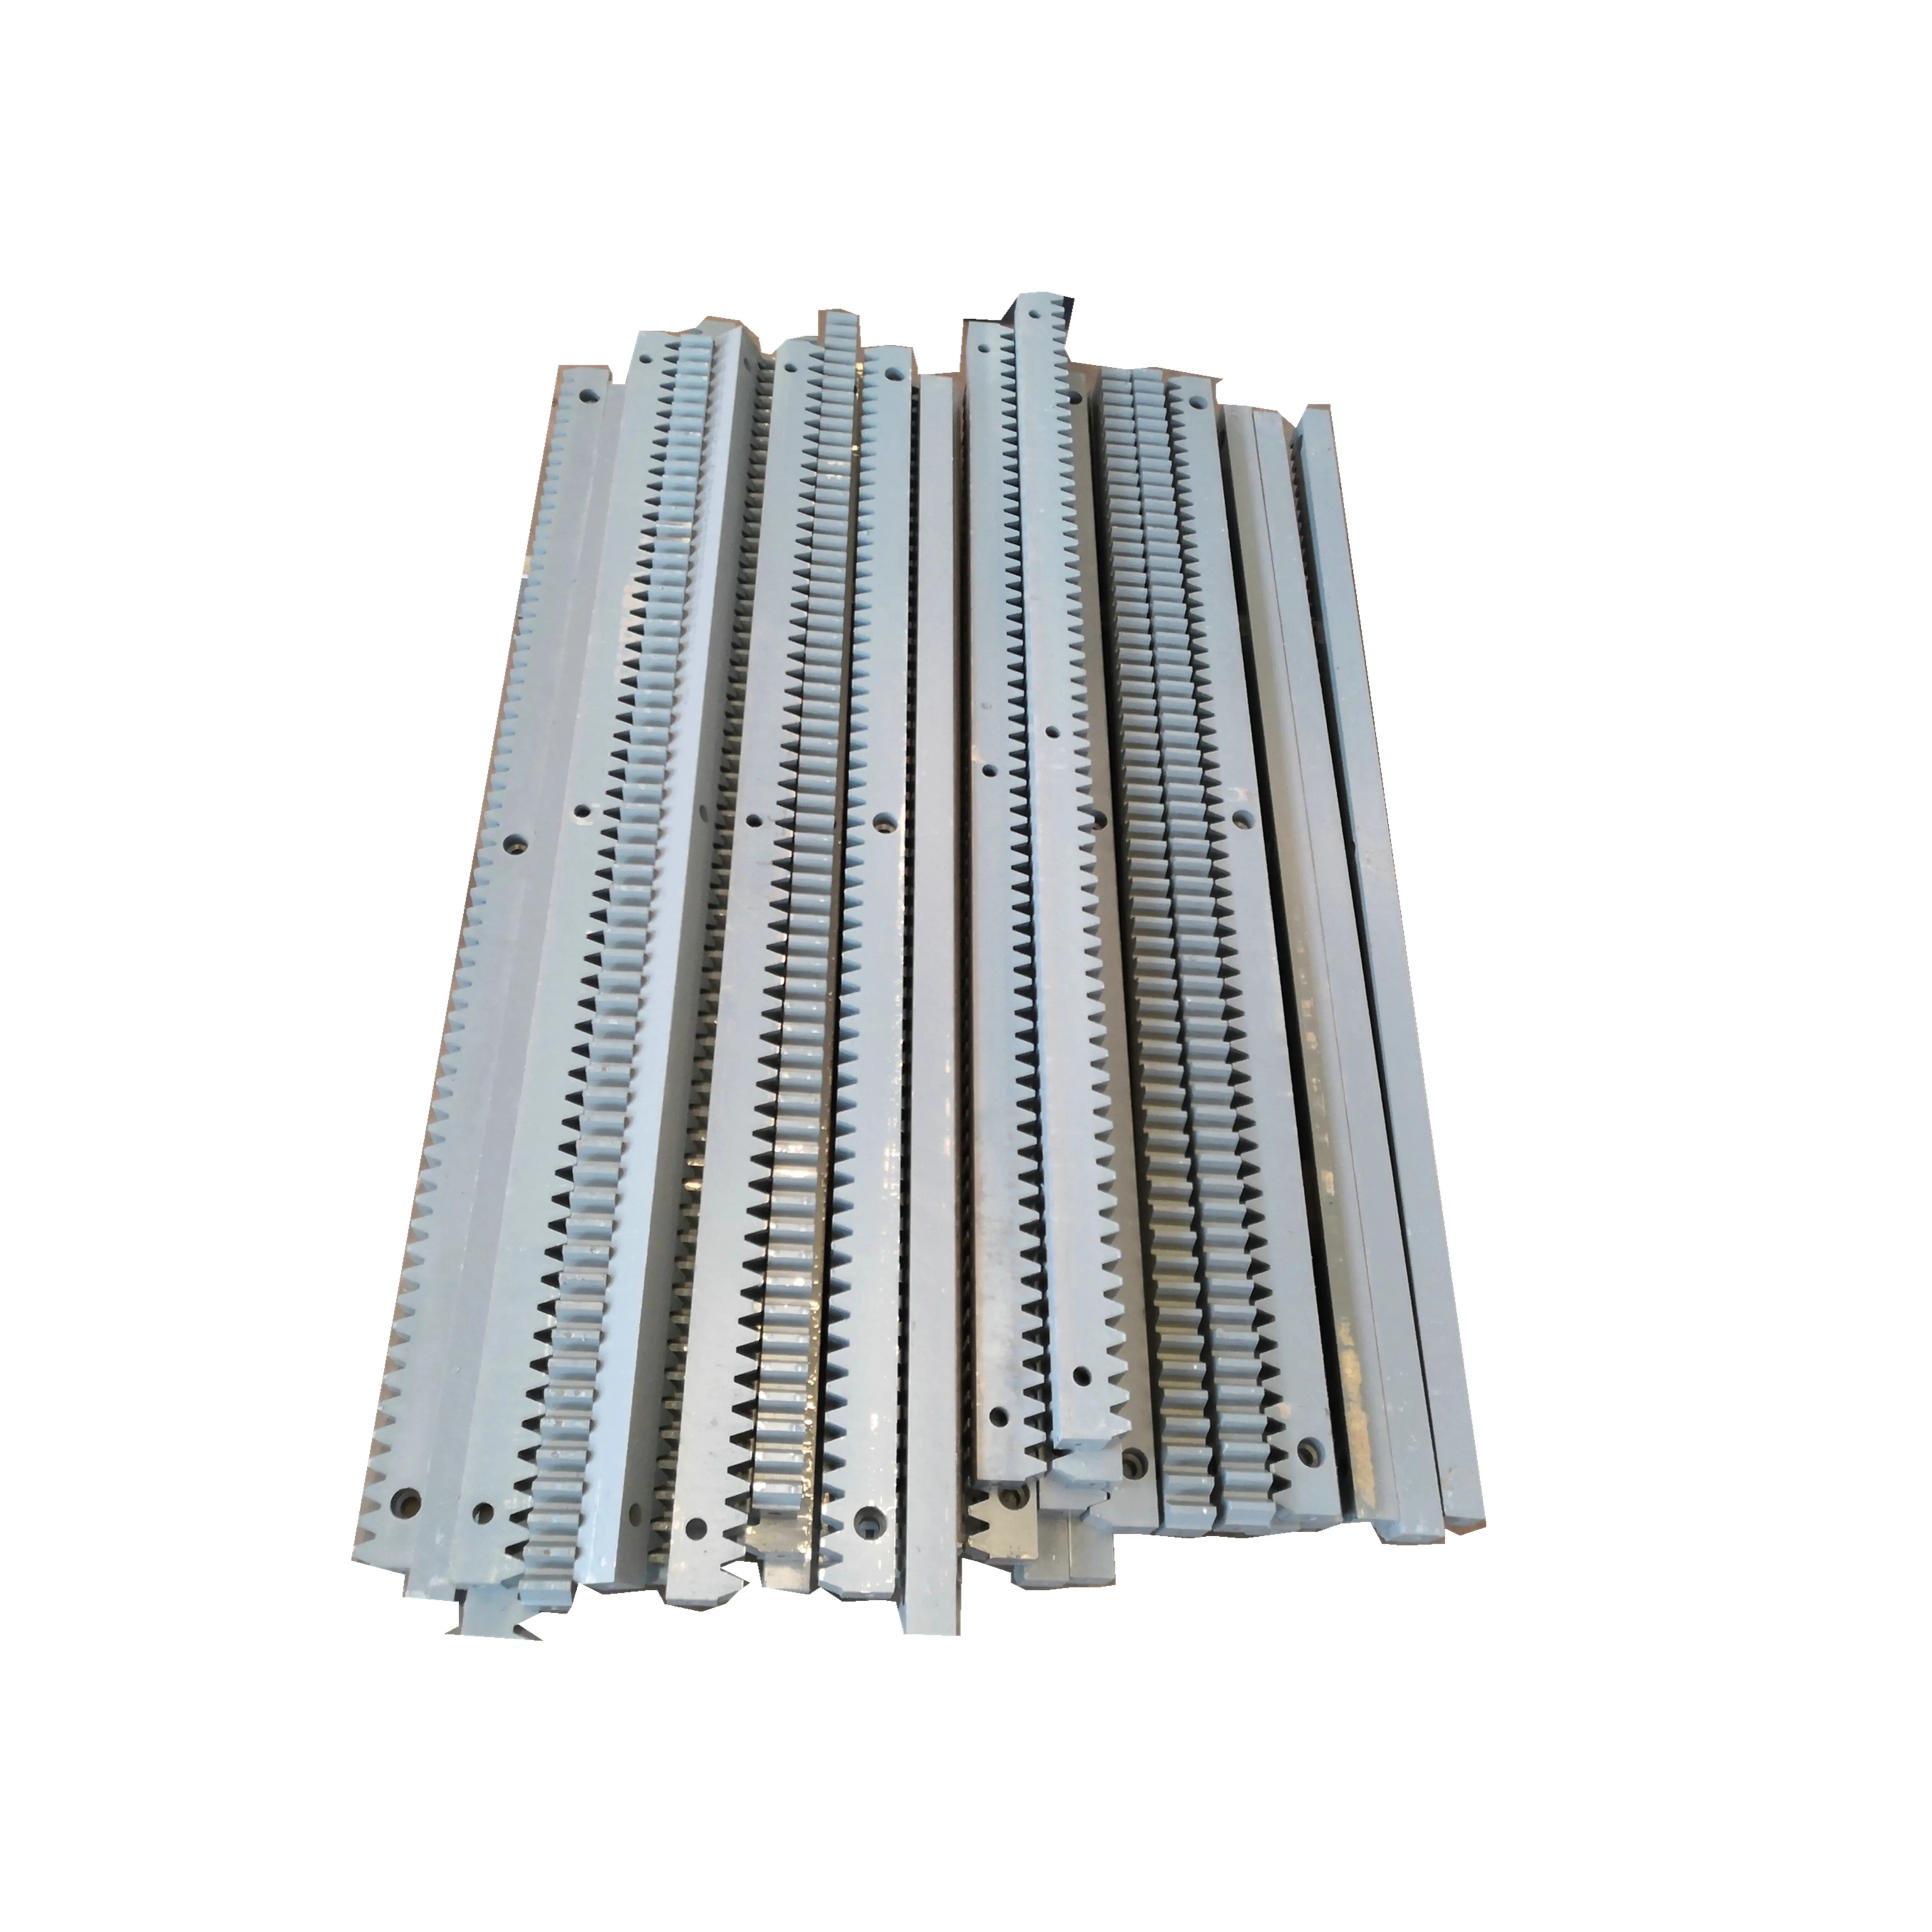 stainless steel / aluminum / metal rack and pinion gears, gear rack for sliding gate